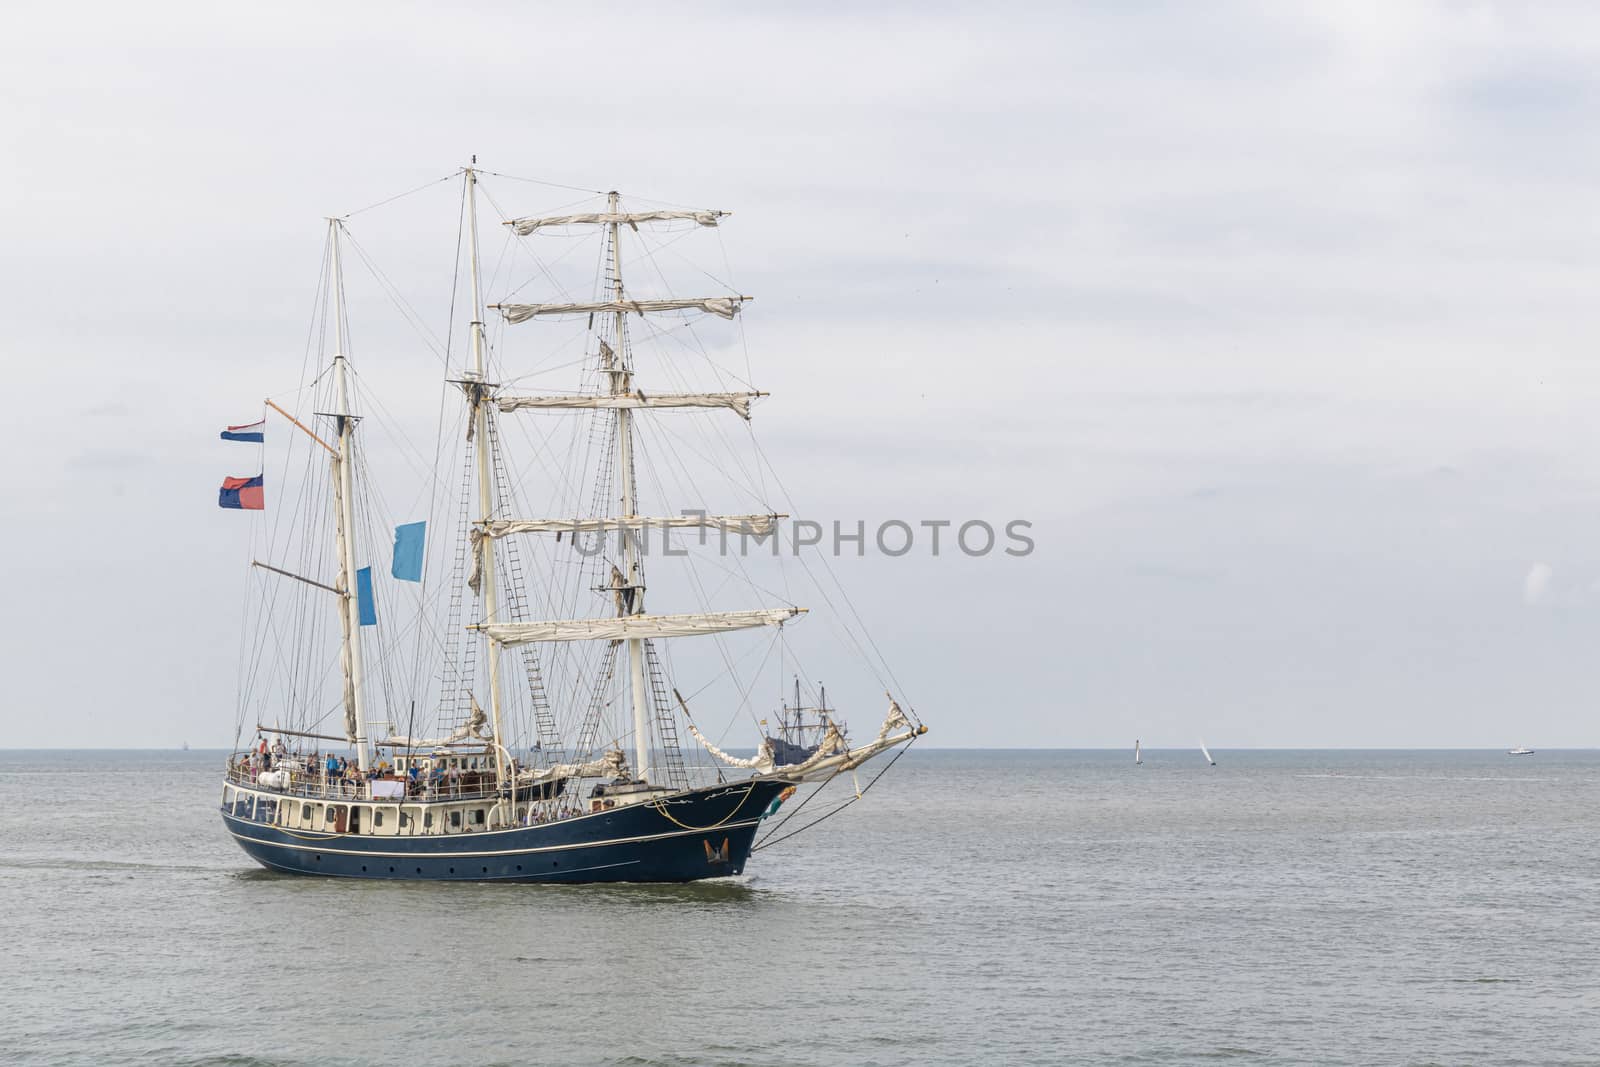 Antique tall ship, vessel entering the harbor of The Hague, Scheveningen under a sunny and blue sky by ankorlight